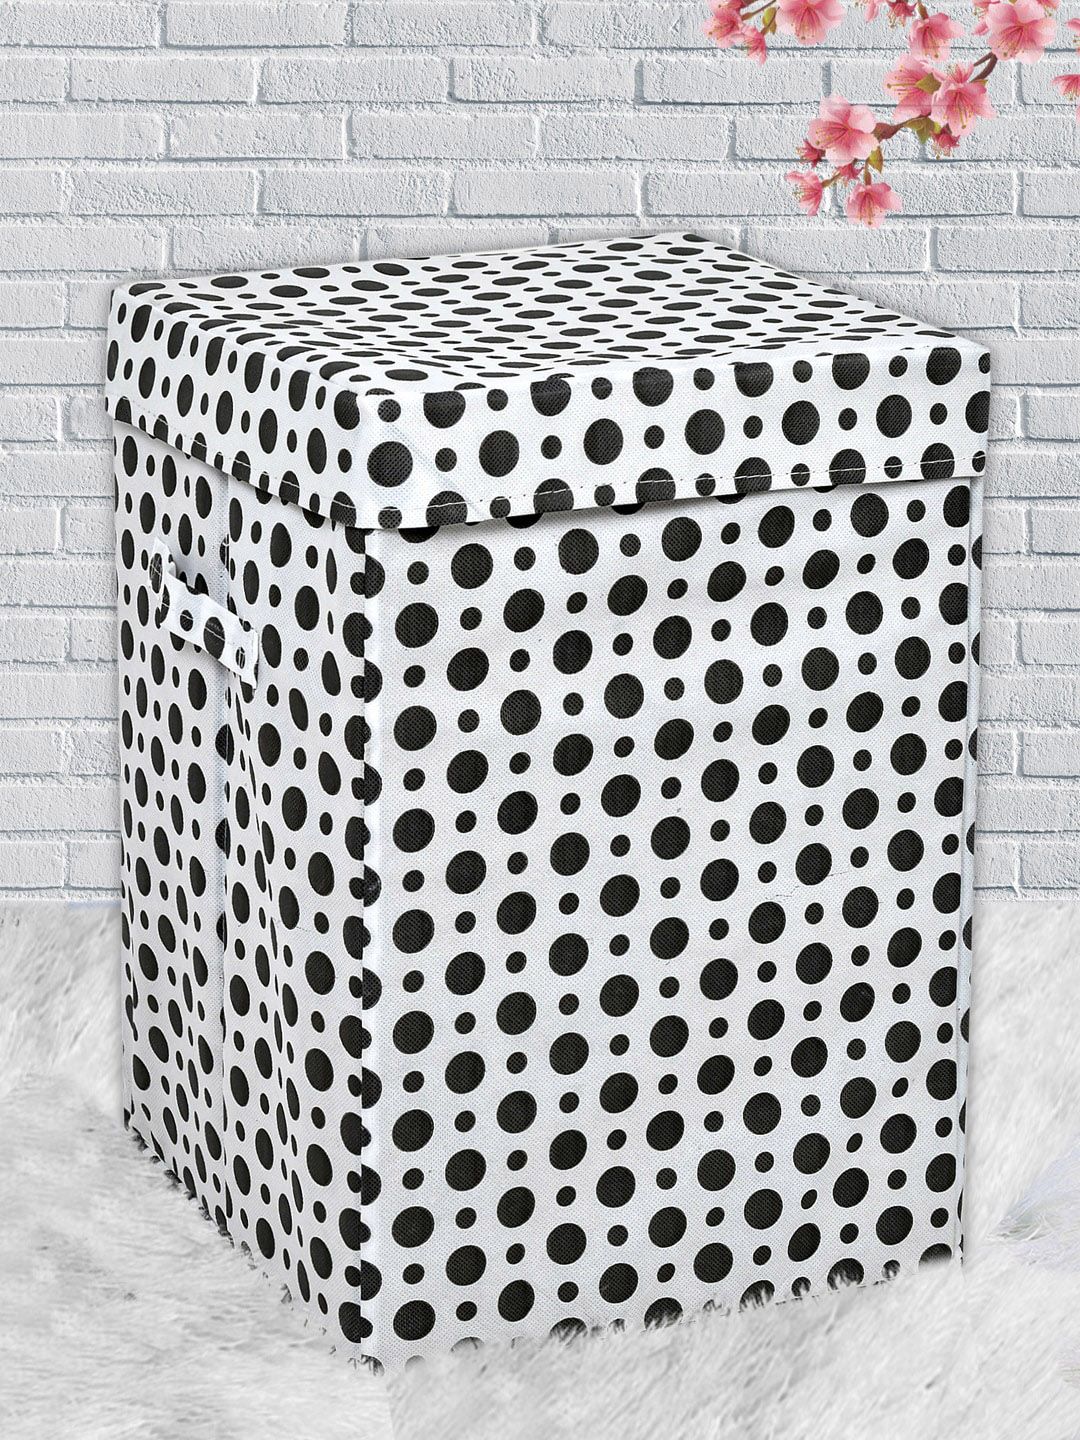 Kuber Industries White & Black Polka Dots Printed Foldable Laundry Bag With Handles & Lid Price in India